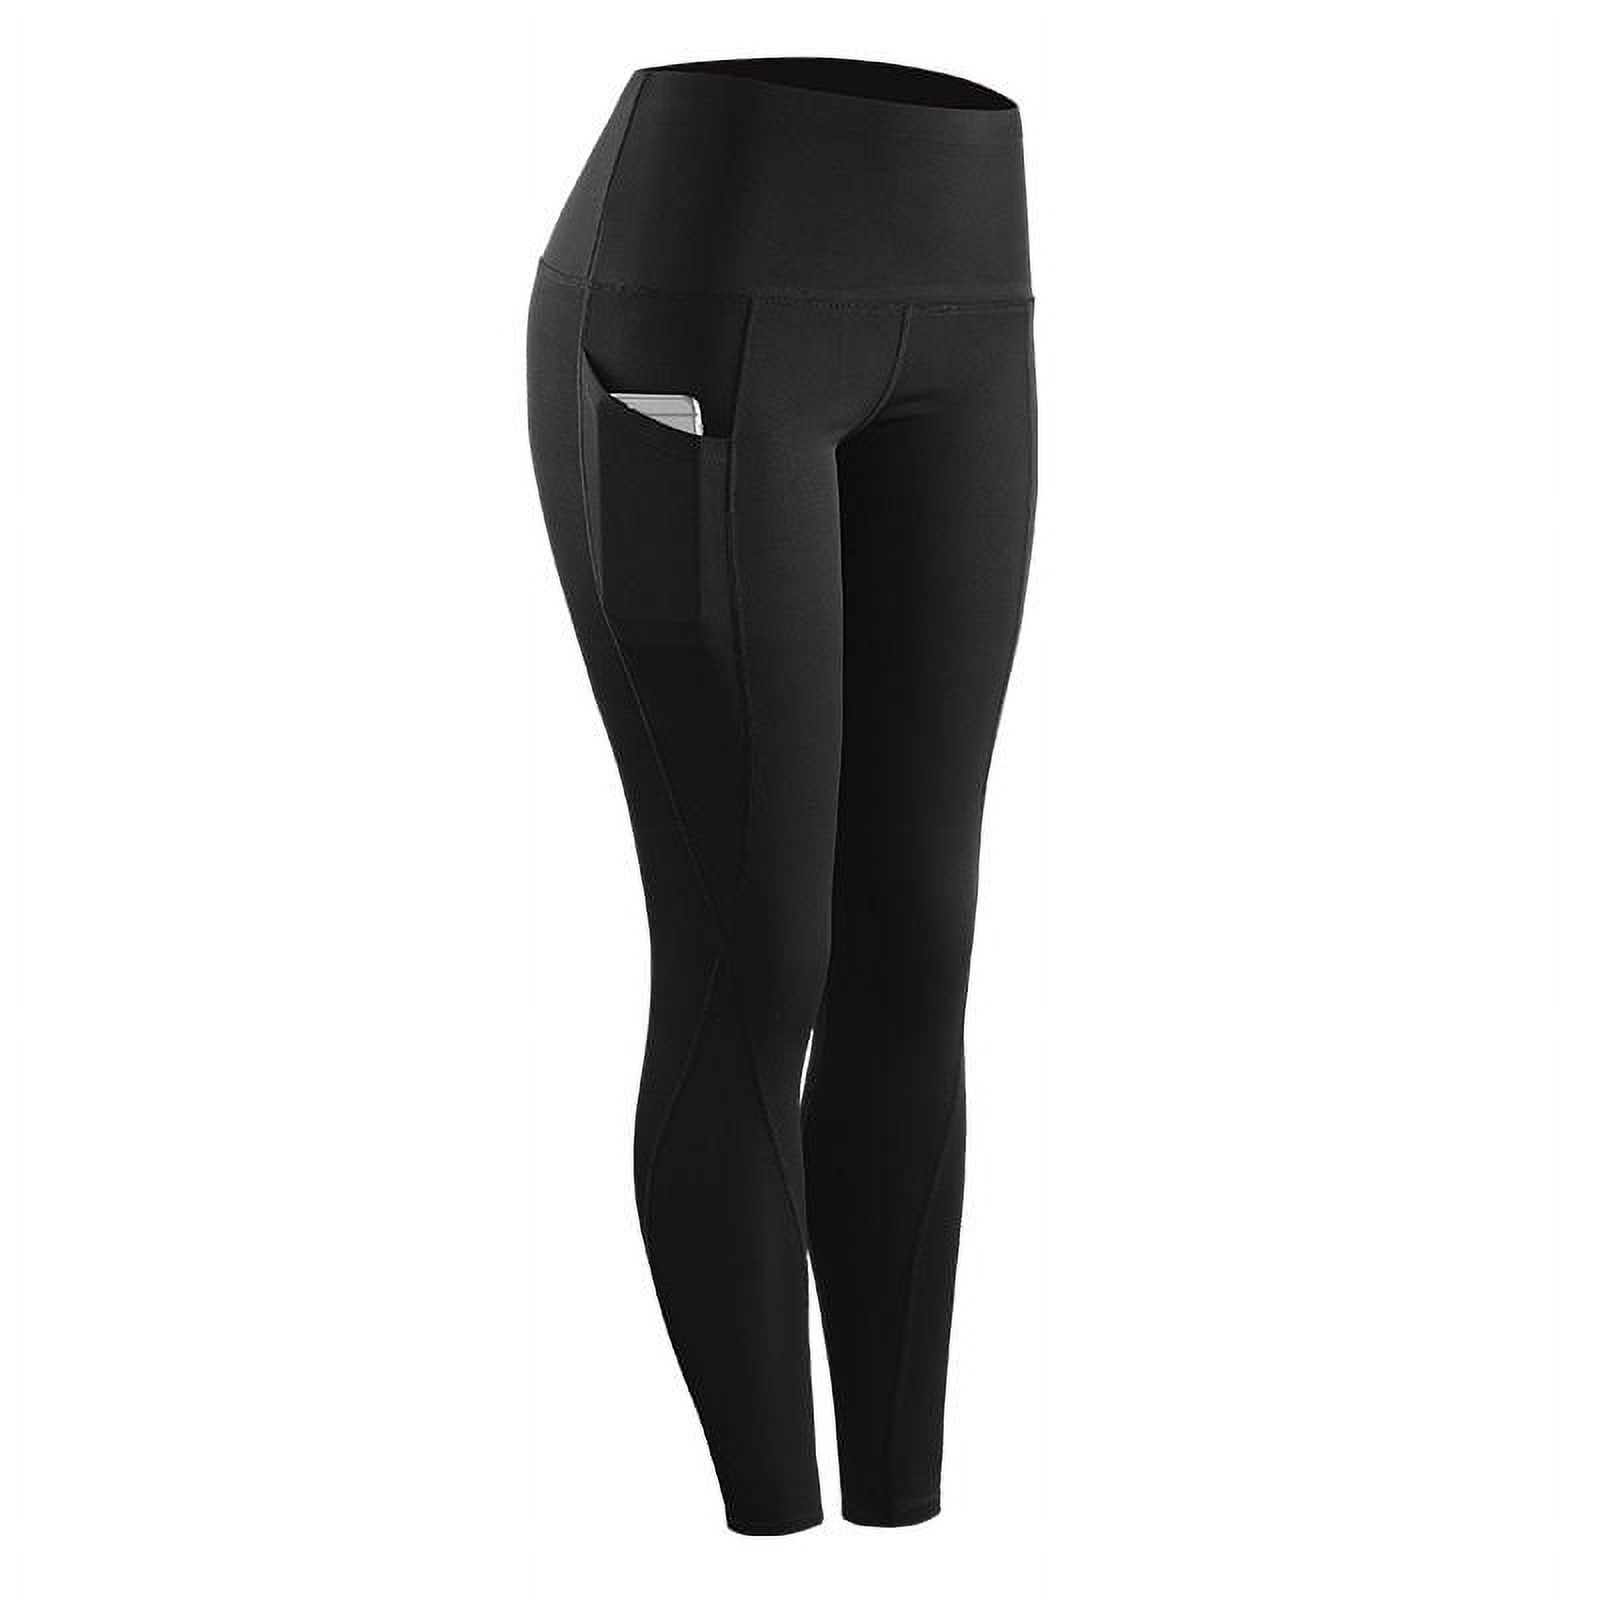 Leggings for Women Sport Gym with Pockets High Elastic Leggings Pant Womens Solid Stretch Compression Sportswear Casual Yoga Jogging Leggings Pants Black M - image 1 of 7